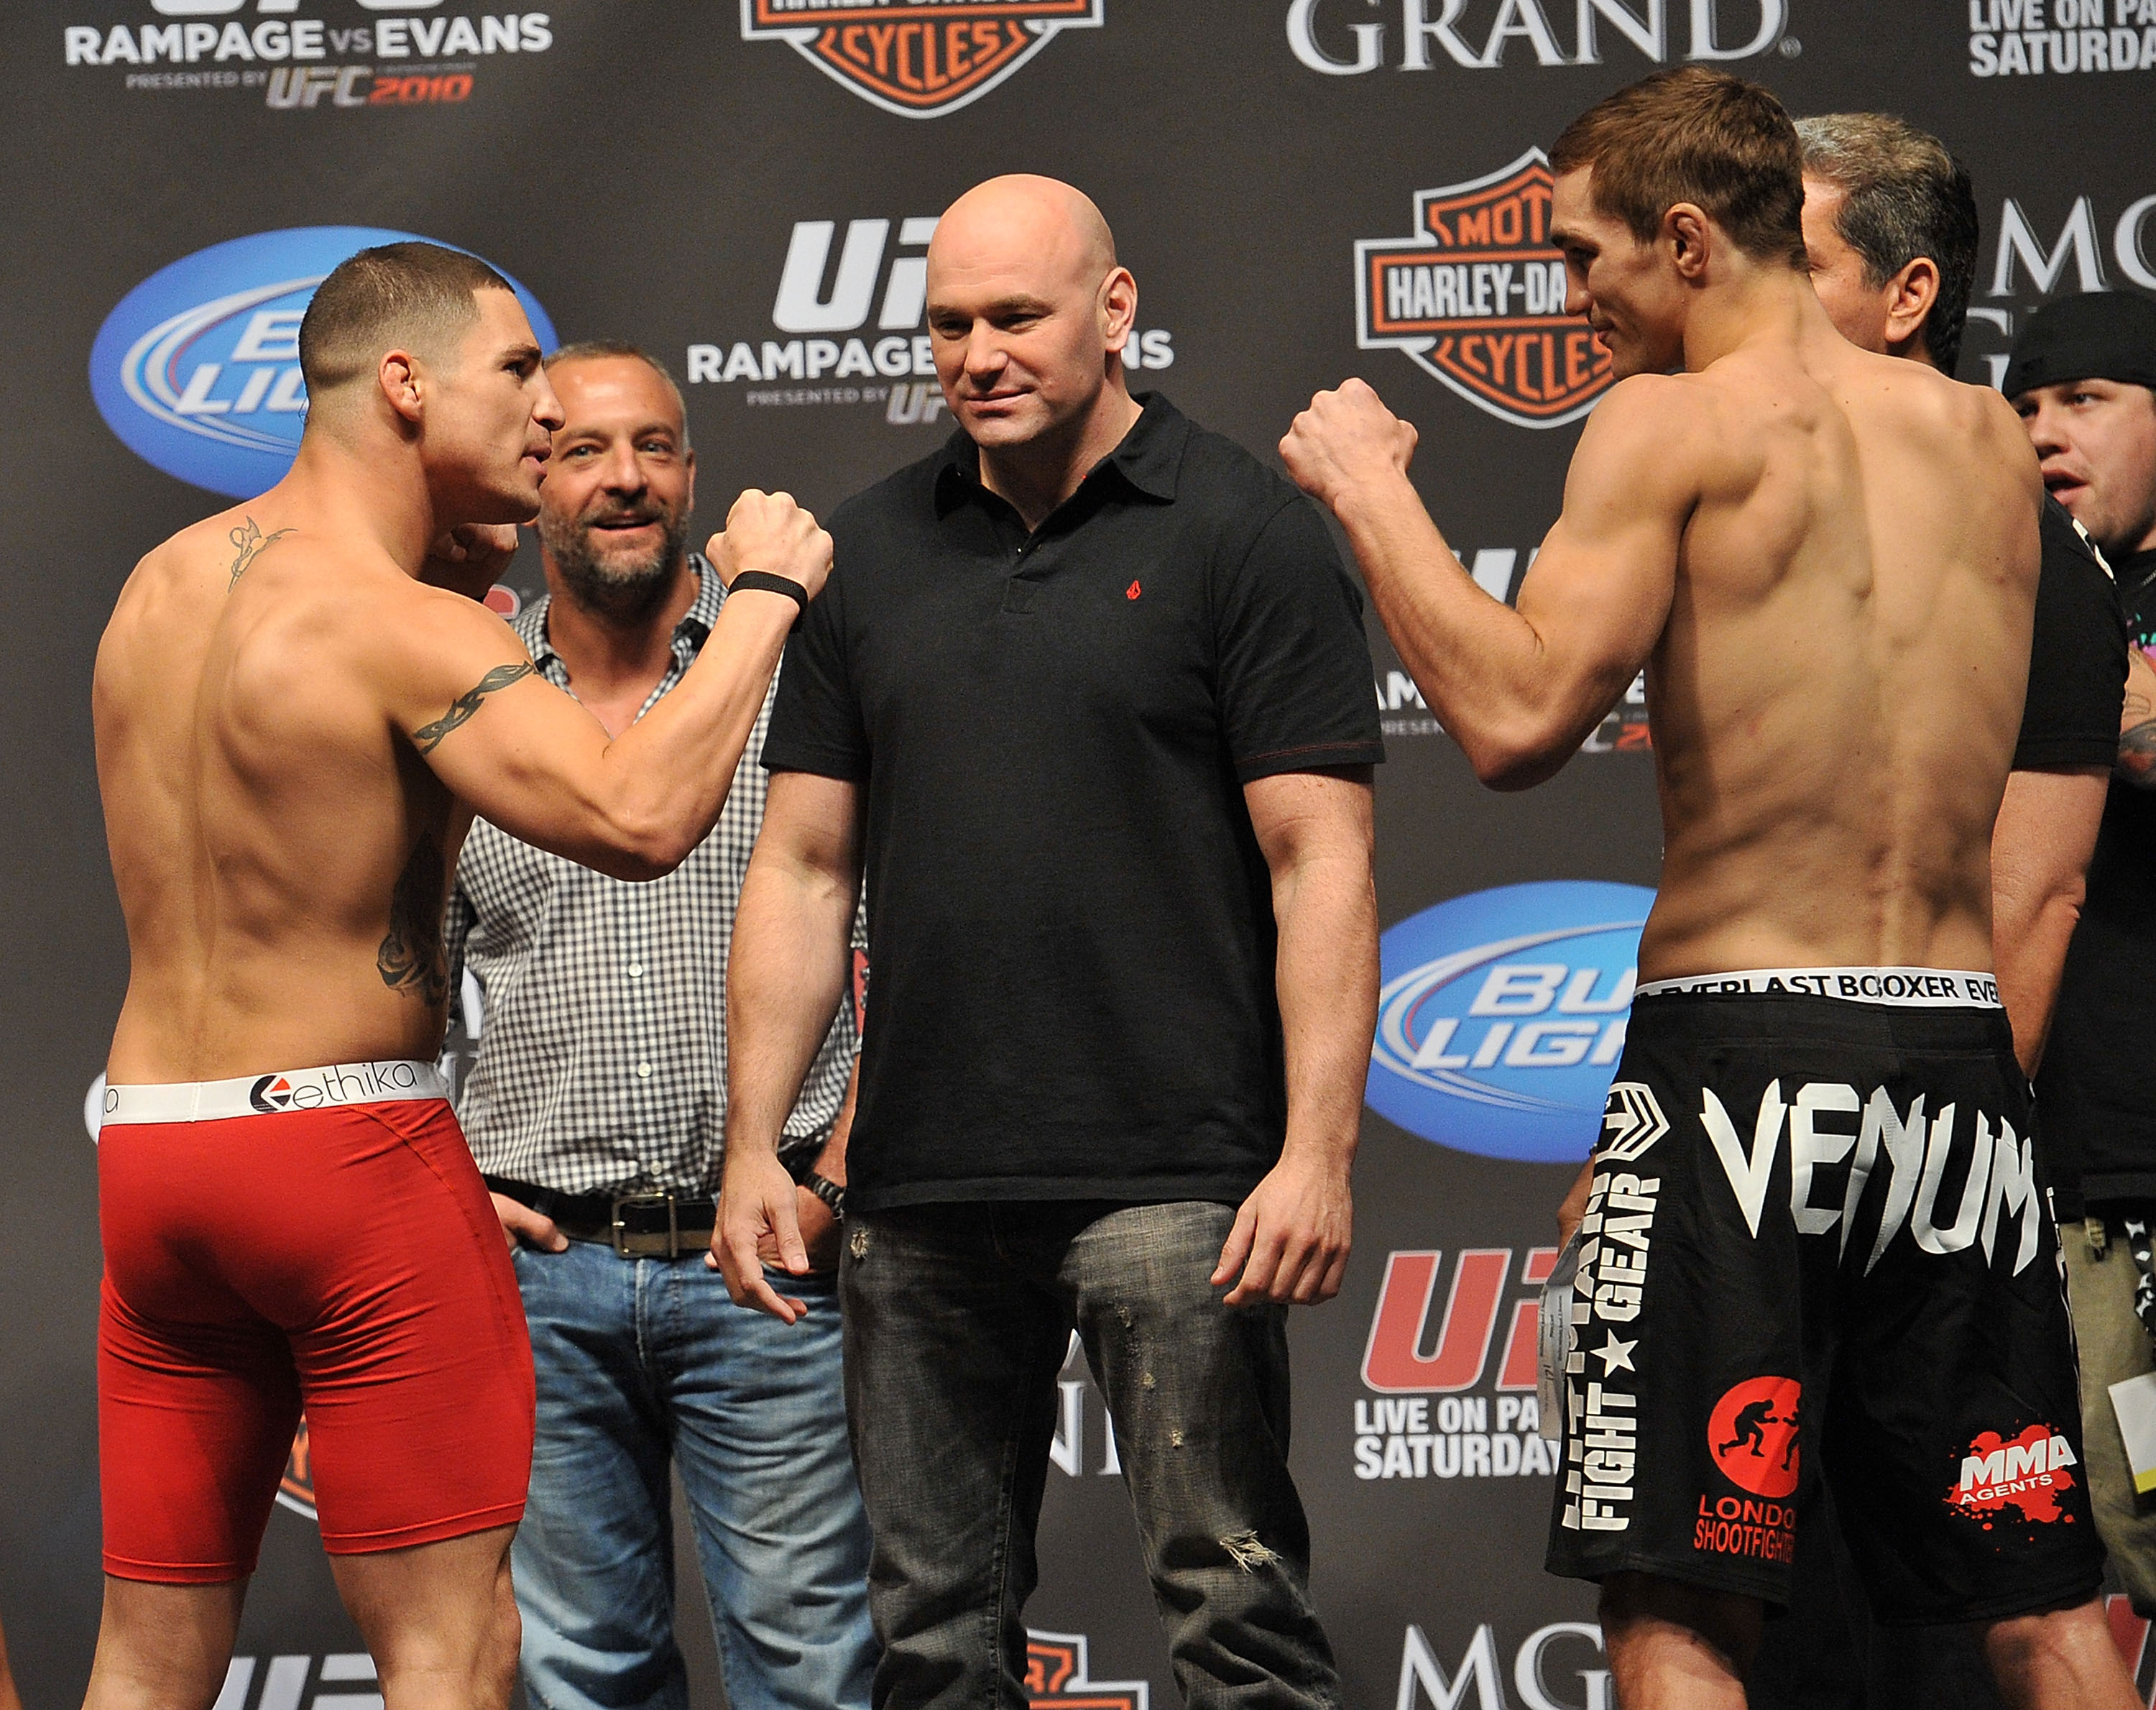 LAS VEGAS - MAY 28:  UFC fighter Diego Sanchez (L) faces off against UFC fighter John Hathaway (R) at UFC 114: Rampage versus Rashad at the Mandalay Bay Hotel on May 28, 2010 in Las Vegas, Nevada.  (Photo by Jon Kopaloff/Getty Images)